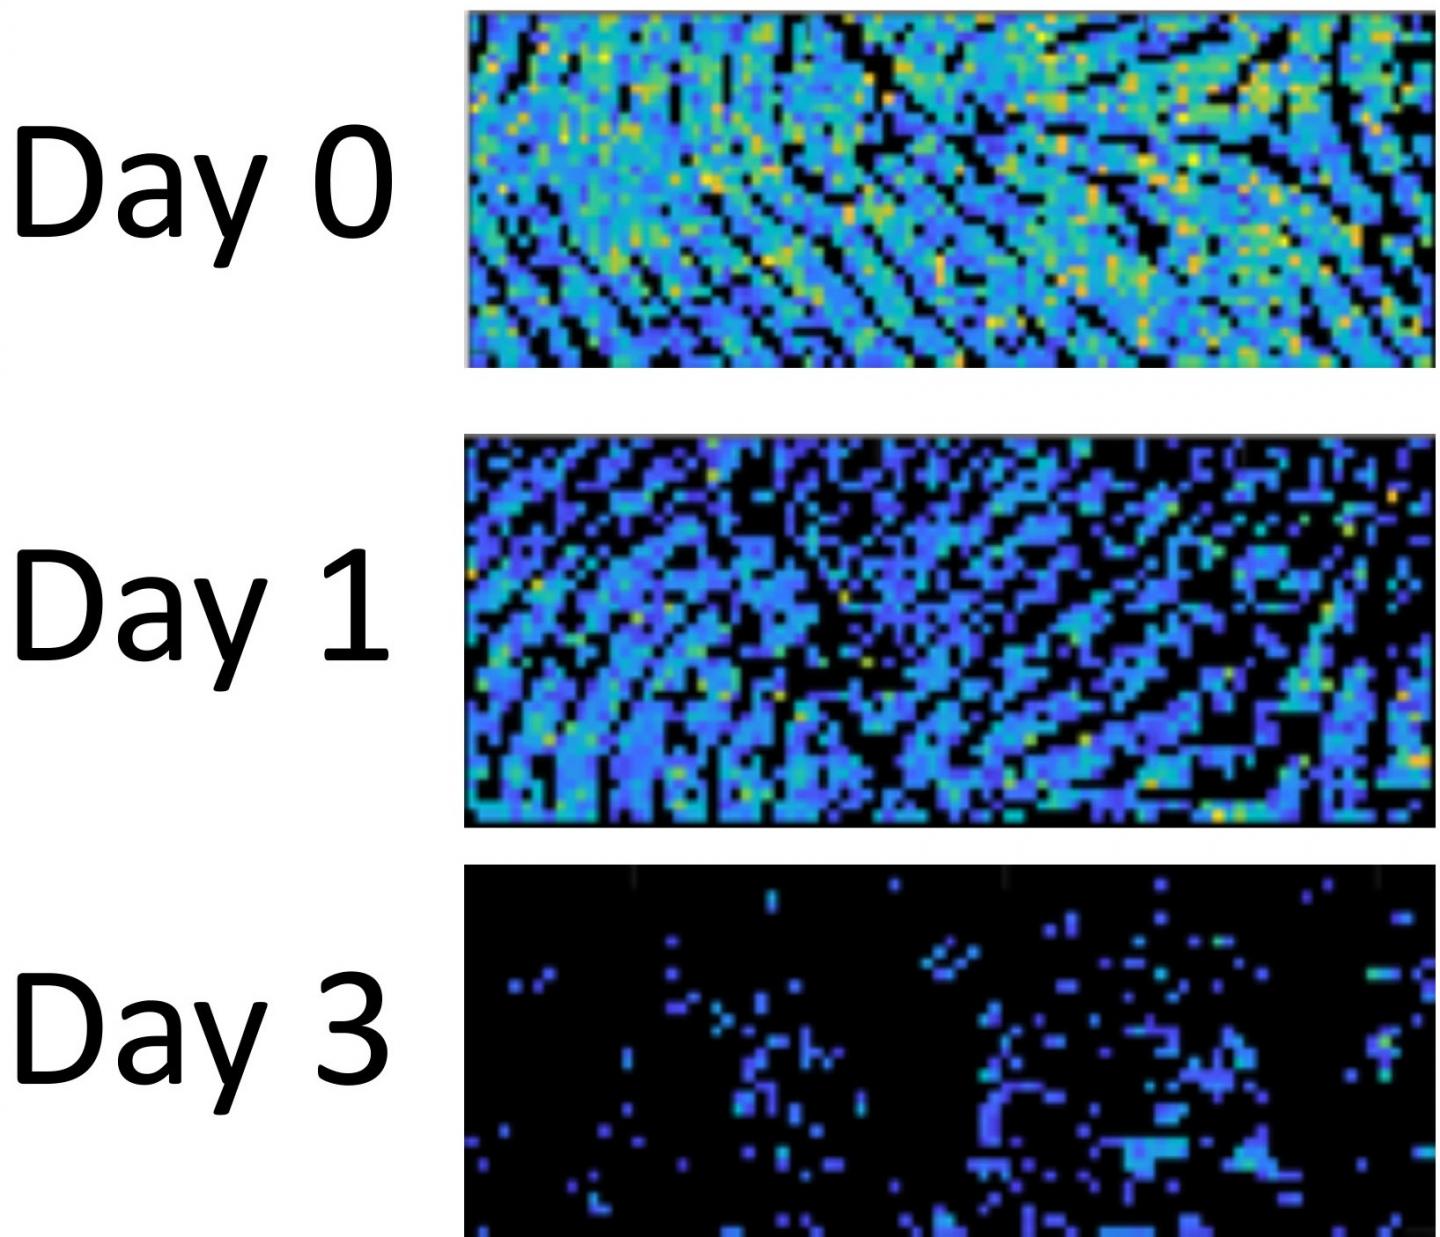 Levels of an unsaturated triacylglycerol decline in fingerprints from an individual from day 0 (top) to day 1 (middle) and day 3 (bottom). Source: Analytical Chemistry